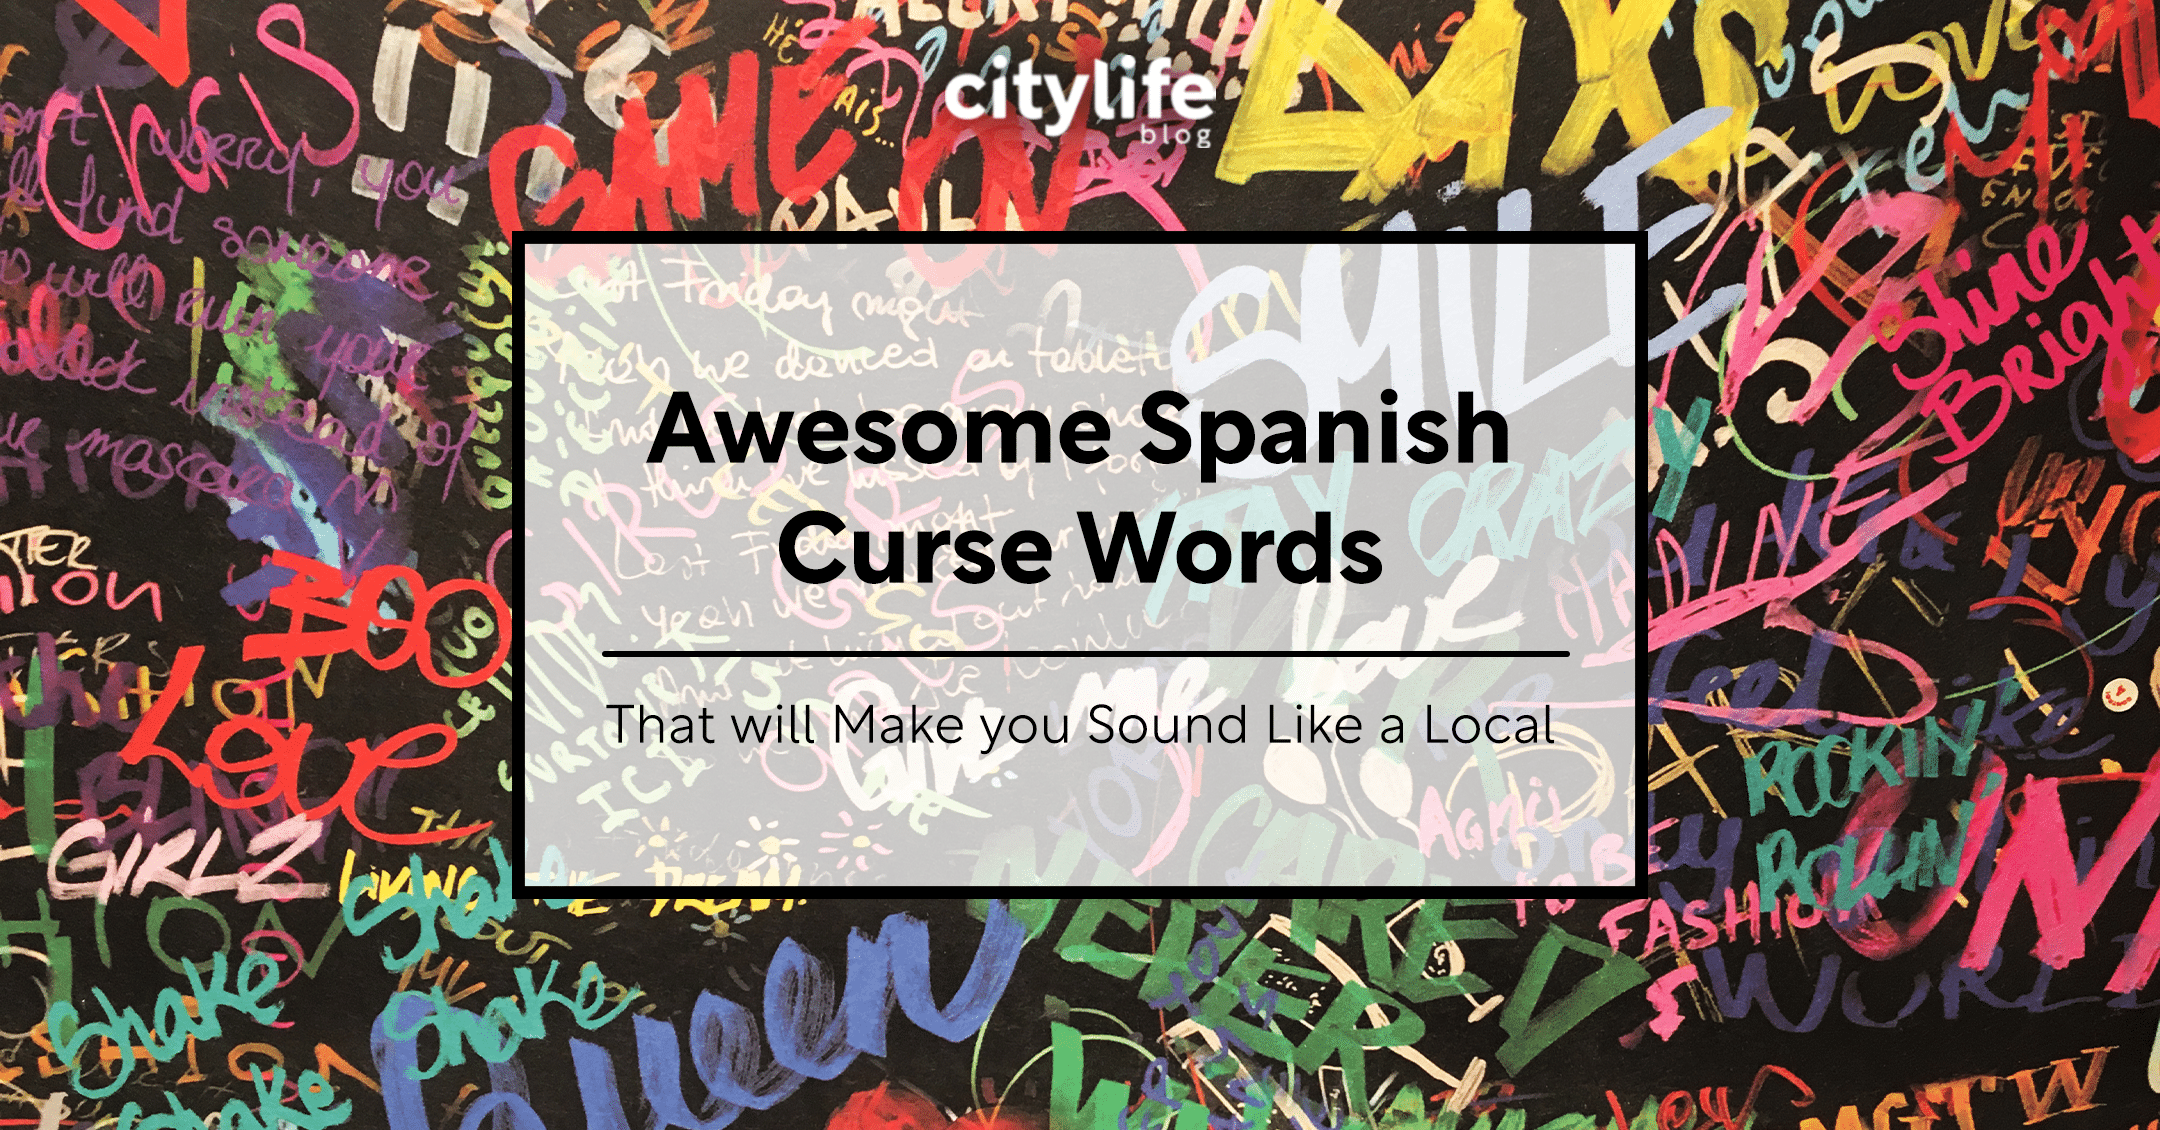 What are the most universally understood slang terms in Spanish